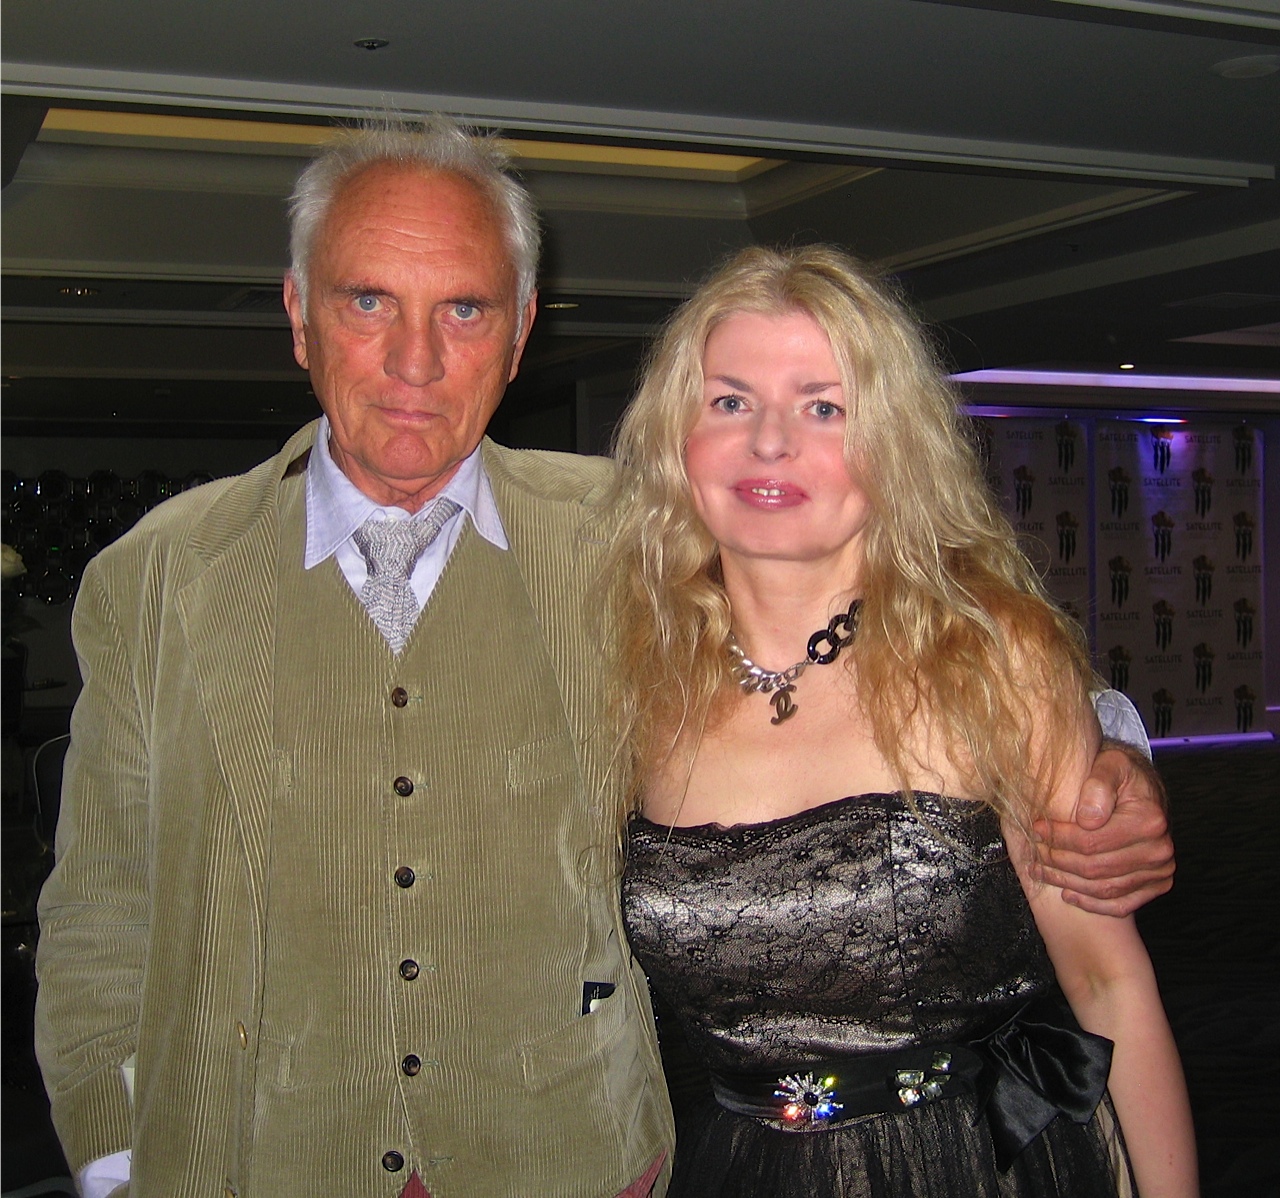 Adrienne Papp of Atlantic Publicity and Terence Stamp at the 2012 International Press Academy, December 16, 2012, LA